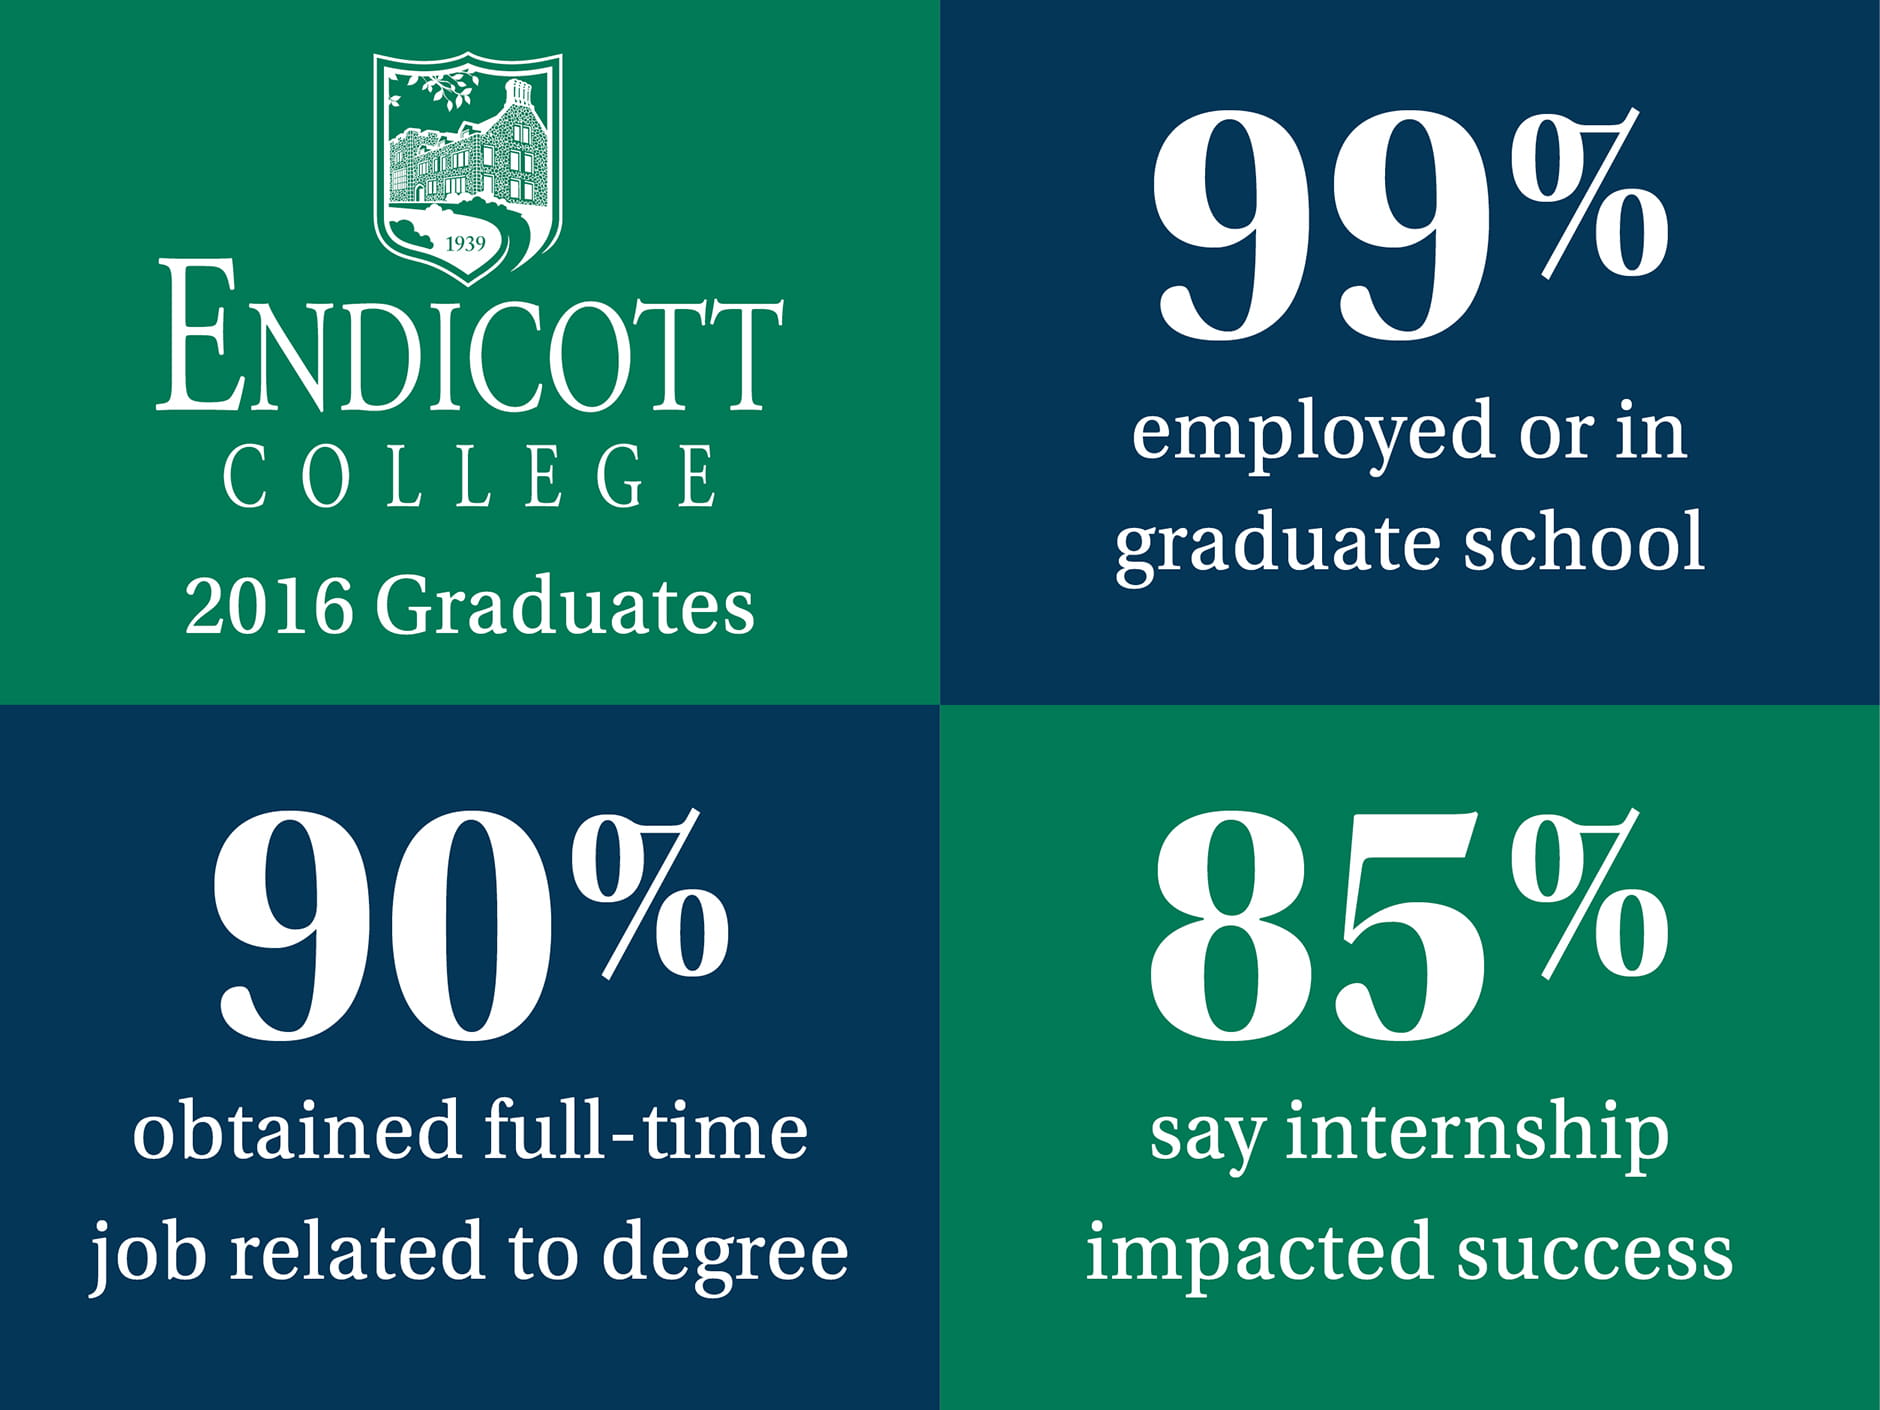 99% of Endicott College 2016 graduates are employed or in graduate school, 90% obtained a full-time job related to degree, and 85% say internship impacted success. 